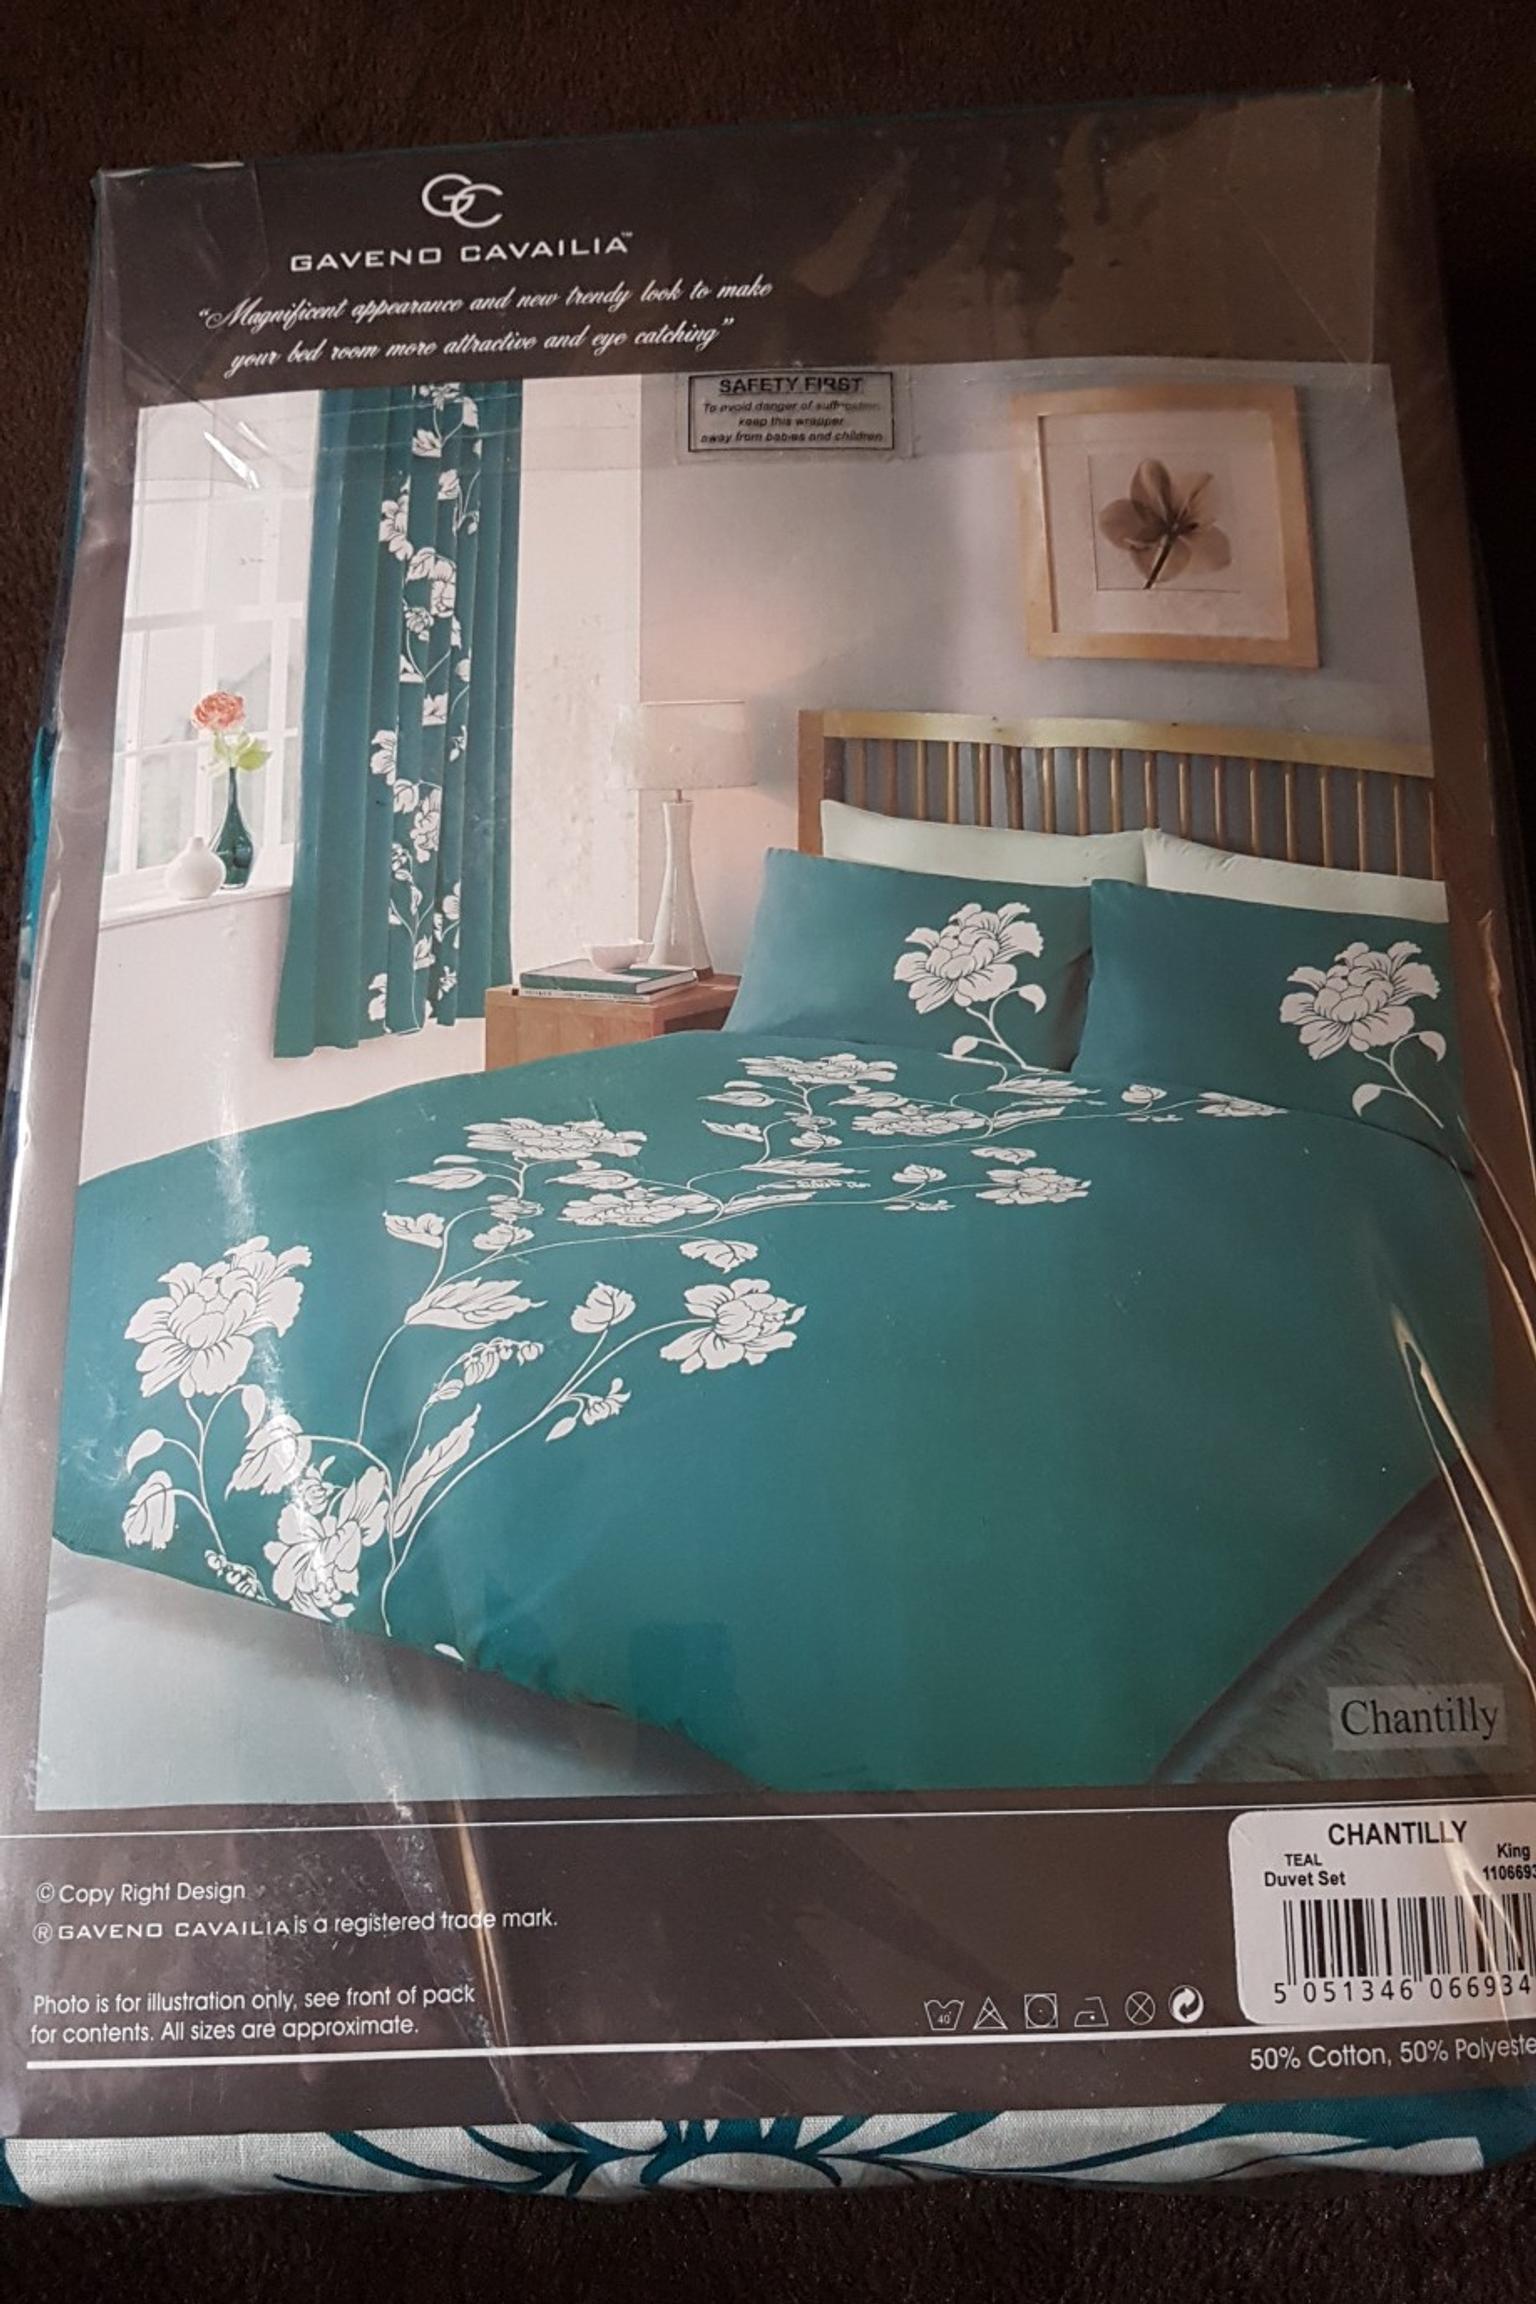 New Teal King Size Duvet Cover Bedding In B71 Sandwell For 9 00